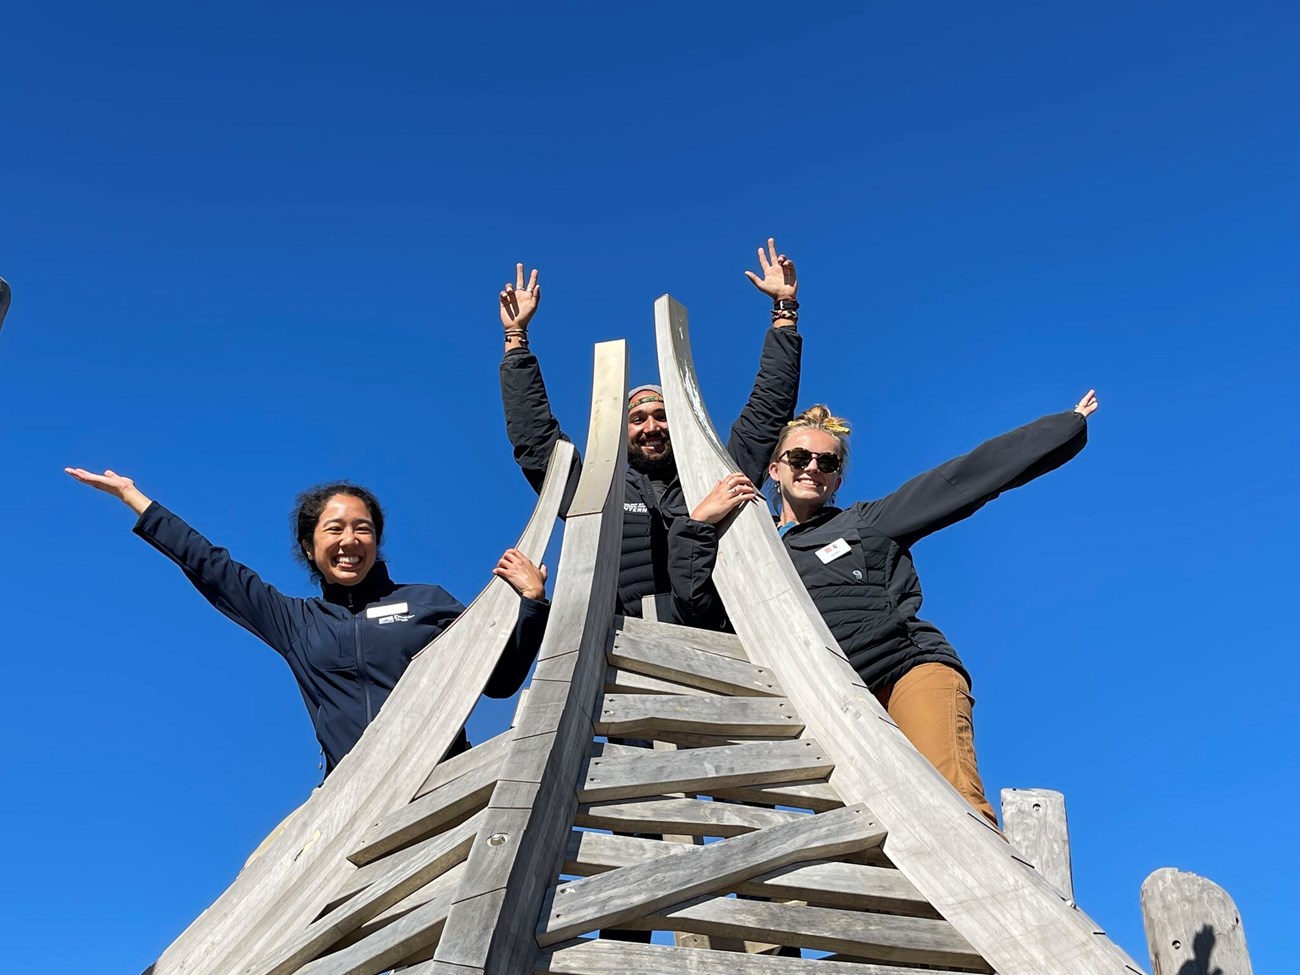 Two Academic interns with a Presidio Trust staff up top a play structure with their hands up in the air!